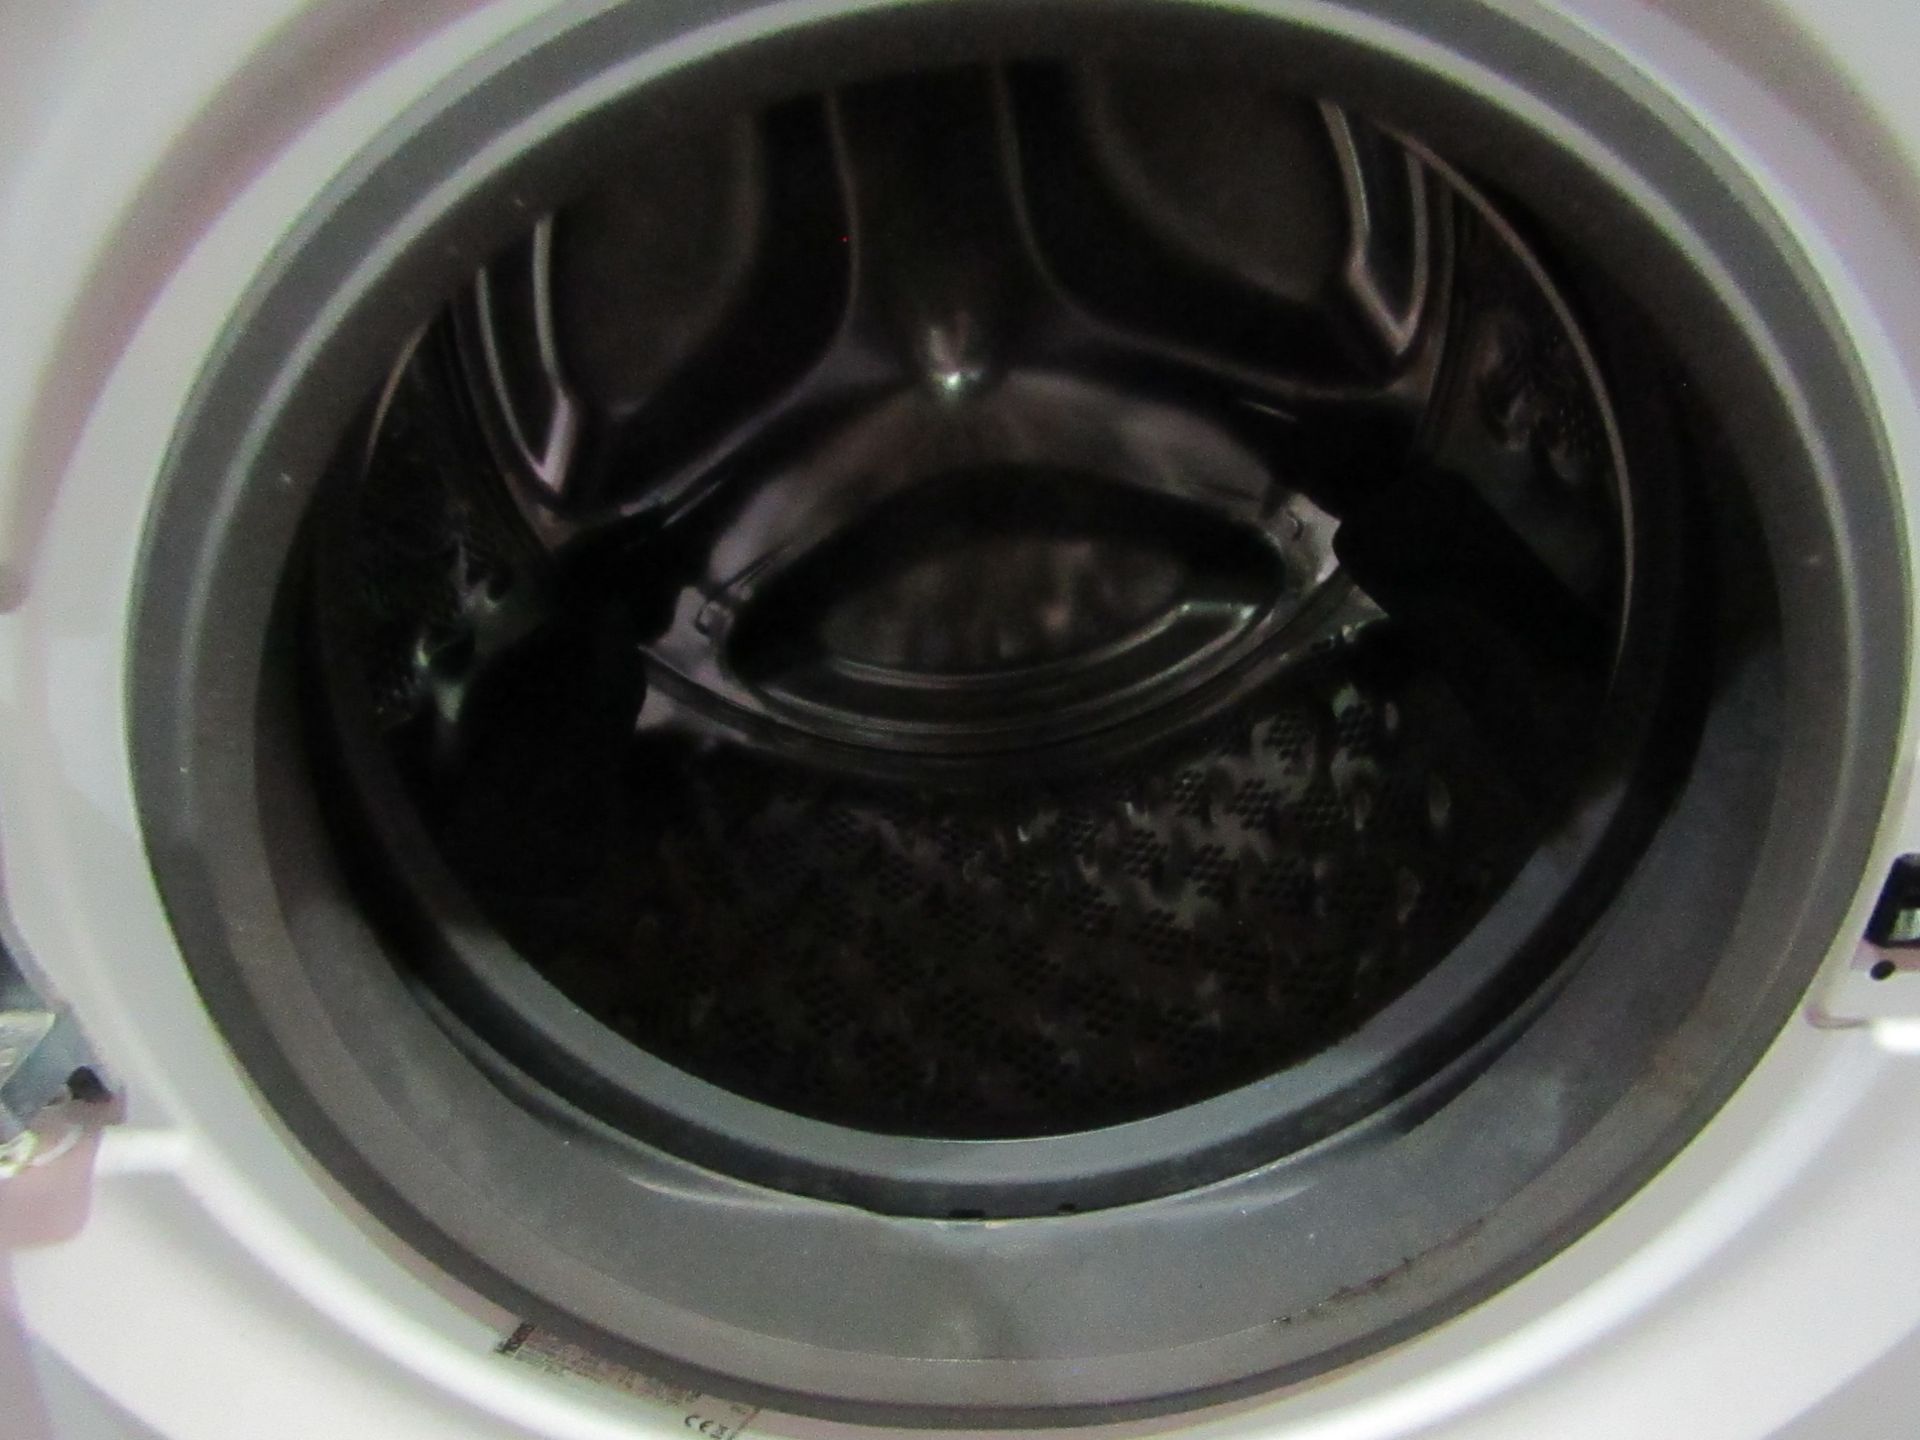 hisense 9kg washing machine, powers ona dn spins but we havent connected it to water to check any - Image 2 of 3